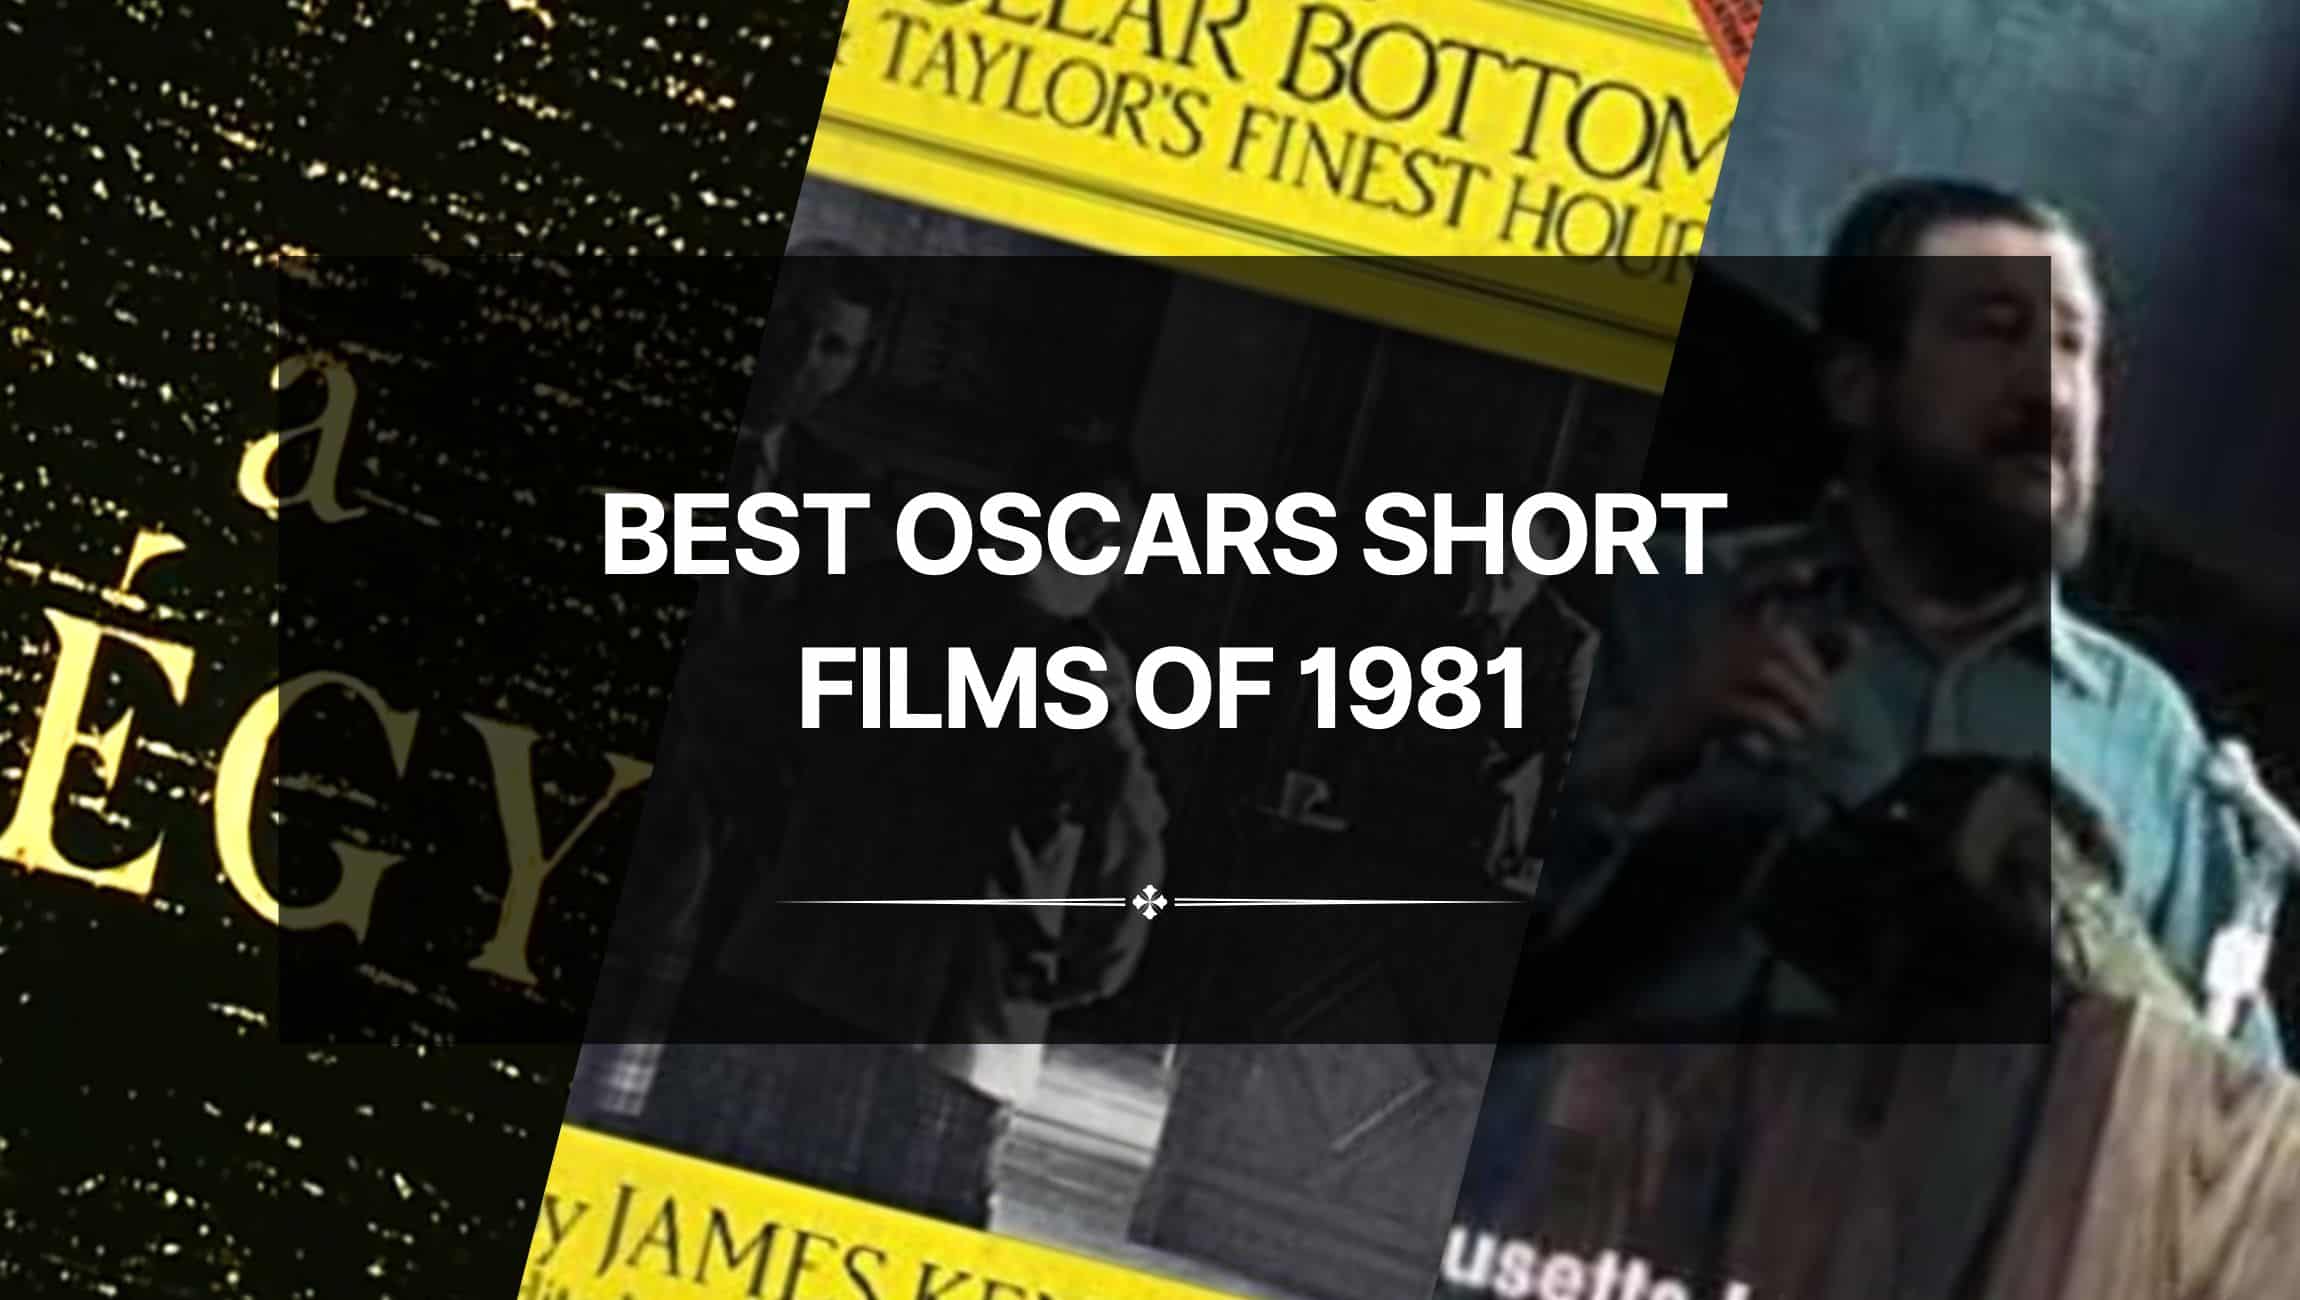 Best Oscars Short Films of 1981: Inspirational and Thrilling